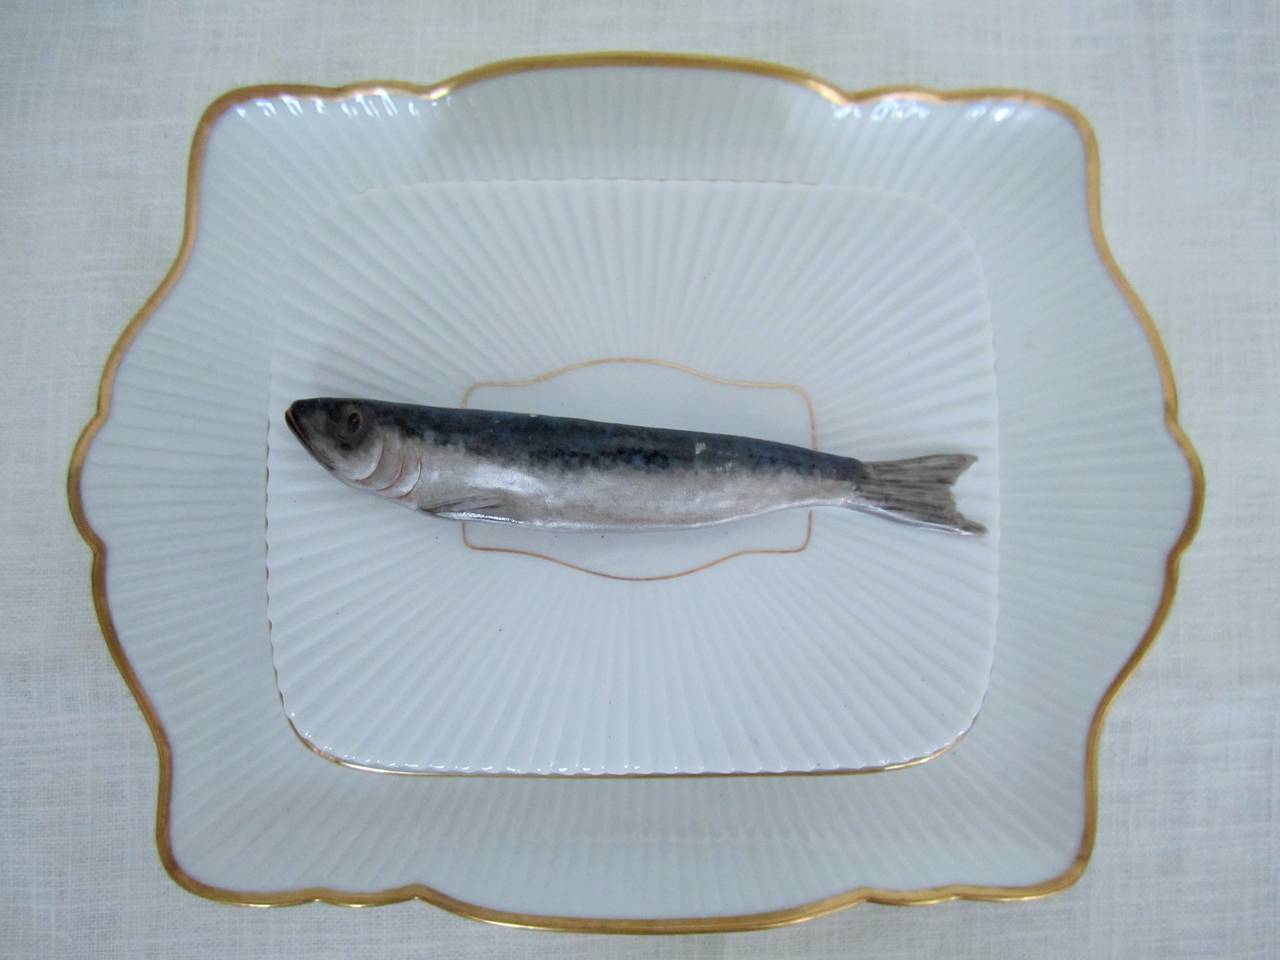 A vintage 3 part French Porcelain 'Sardine' Box Dish by Mehun, with hand painted sardine and karat gold trim. Makers mark under base plate and under 'box' as shown in images. Item available here online, and by request, can be made available at my